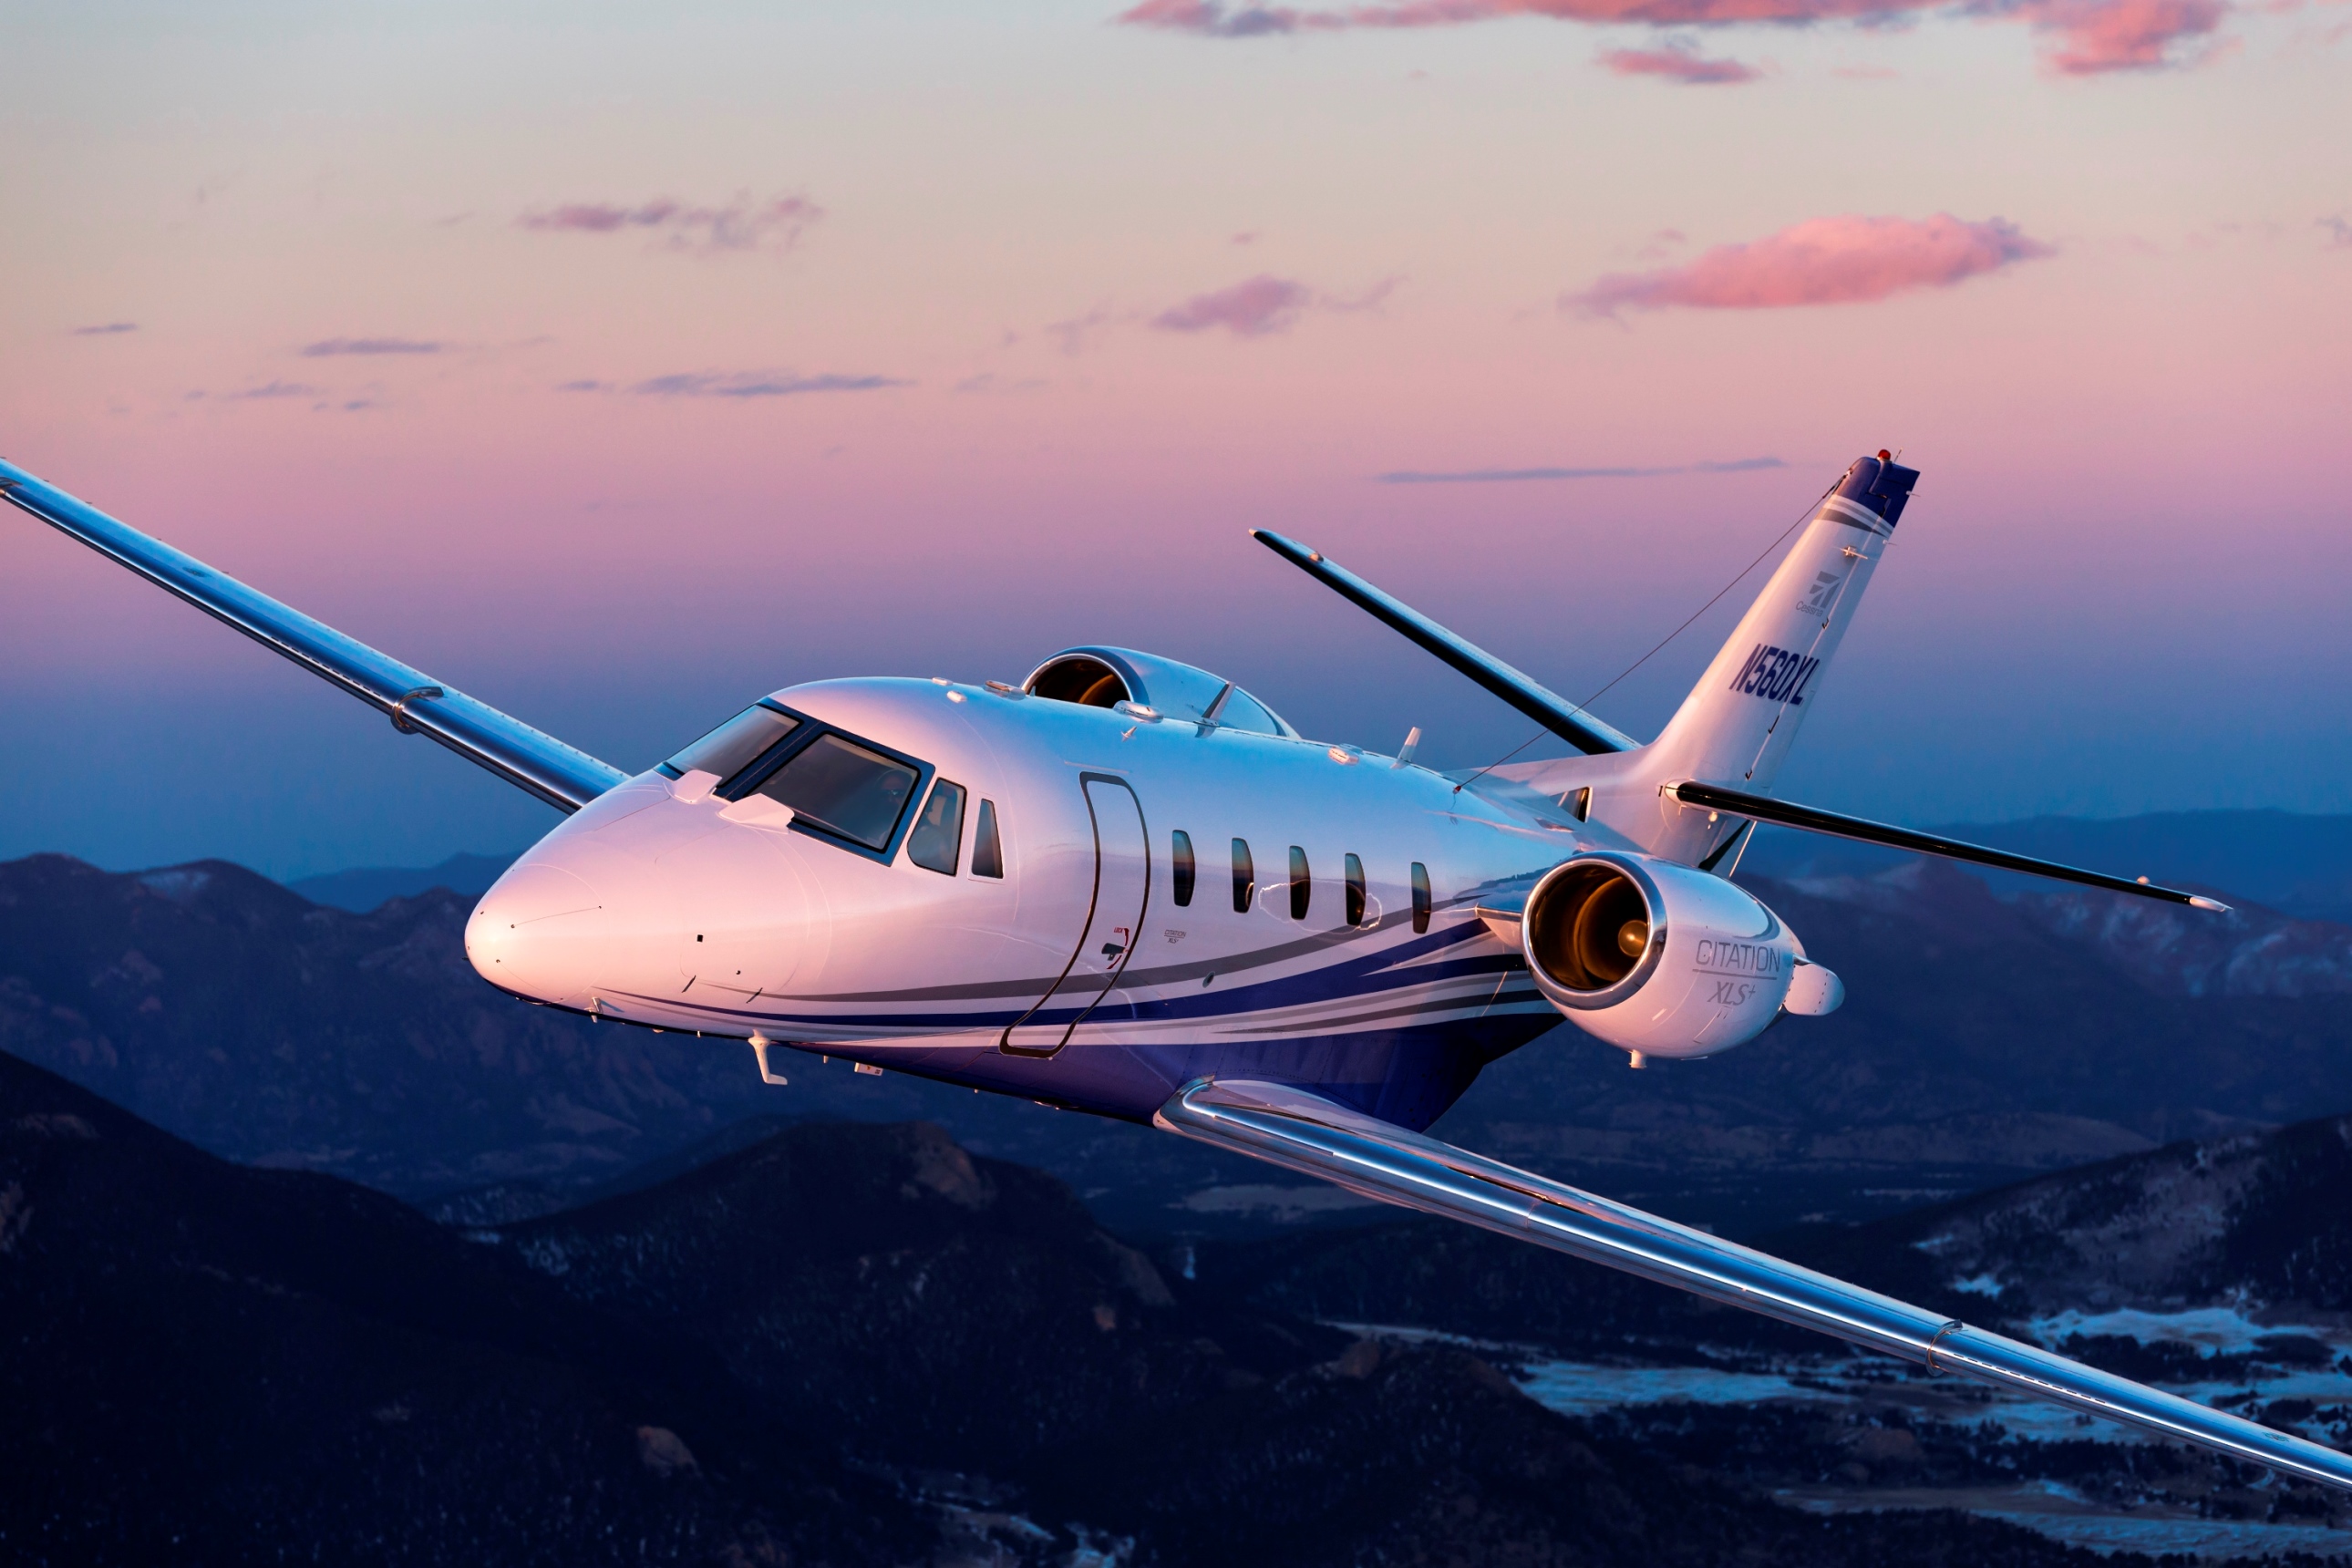 Textron Aviation recognized as industry leader for in-flight connectivity upgrade